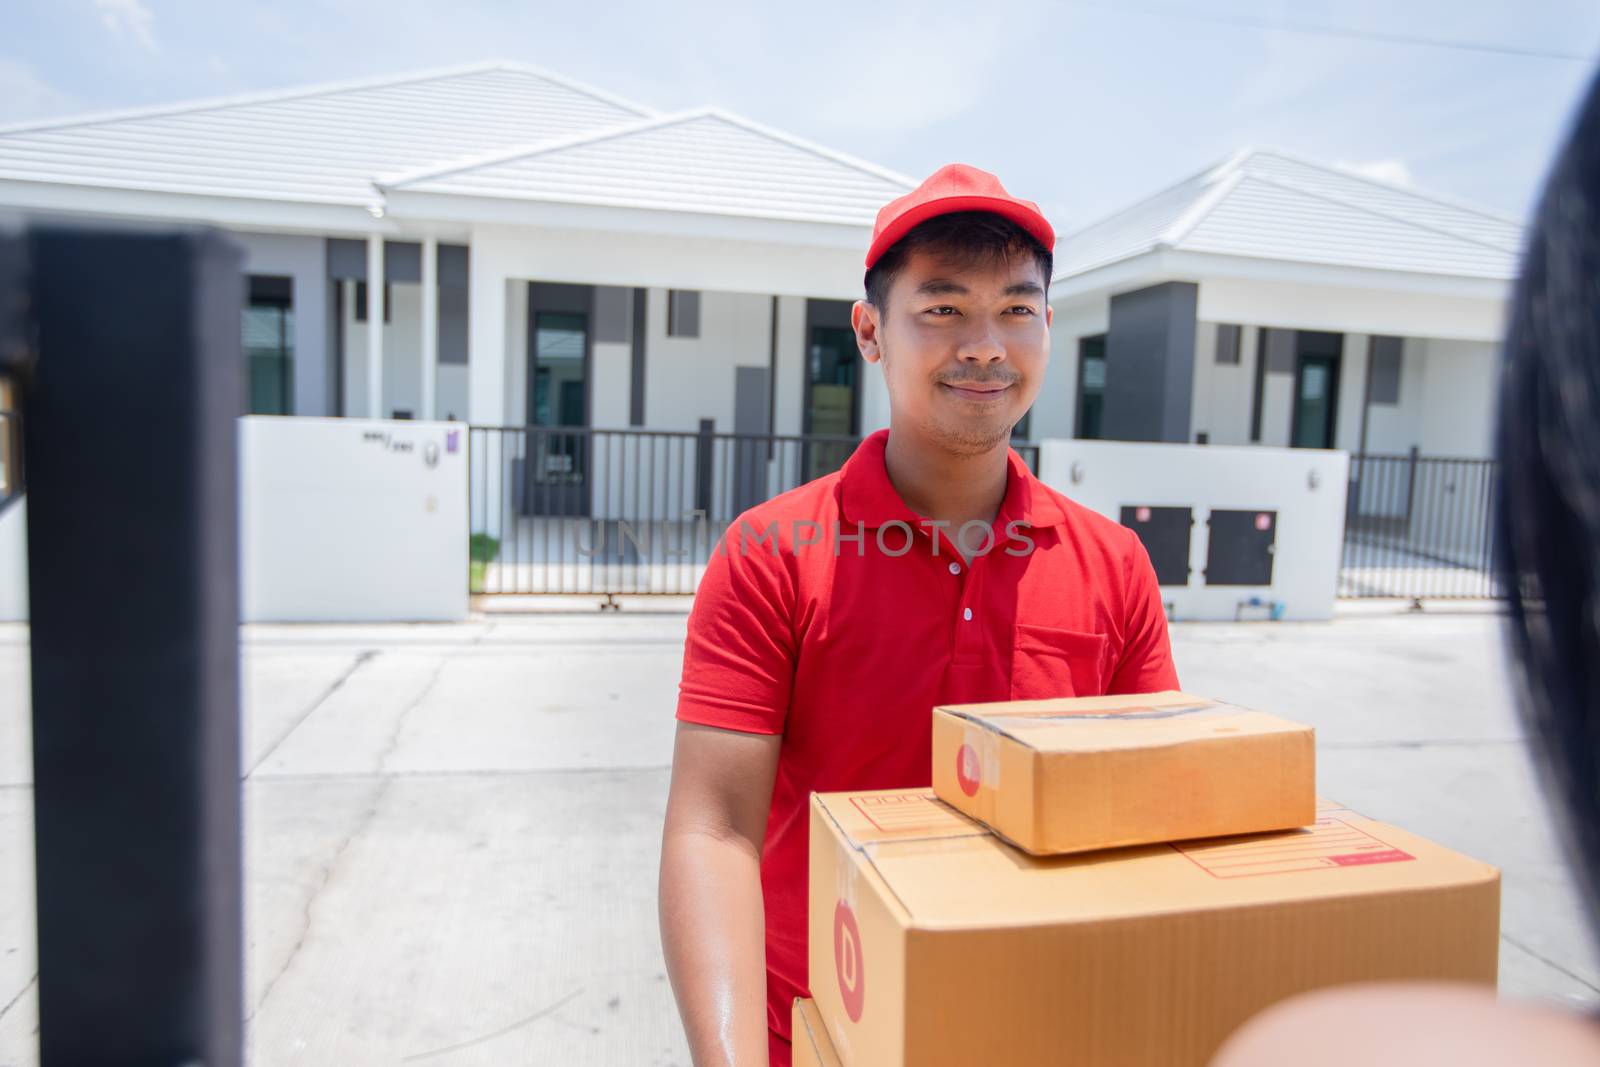 Asian delivery servicemen wearing a red uniform with a red cap and handling cardboard boxes to give to the female customer in front of the house. Online shopping and Express delivery